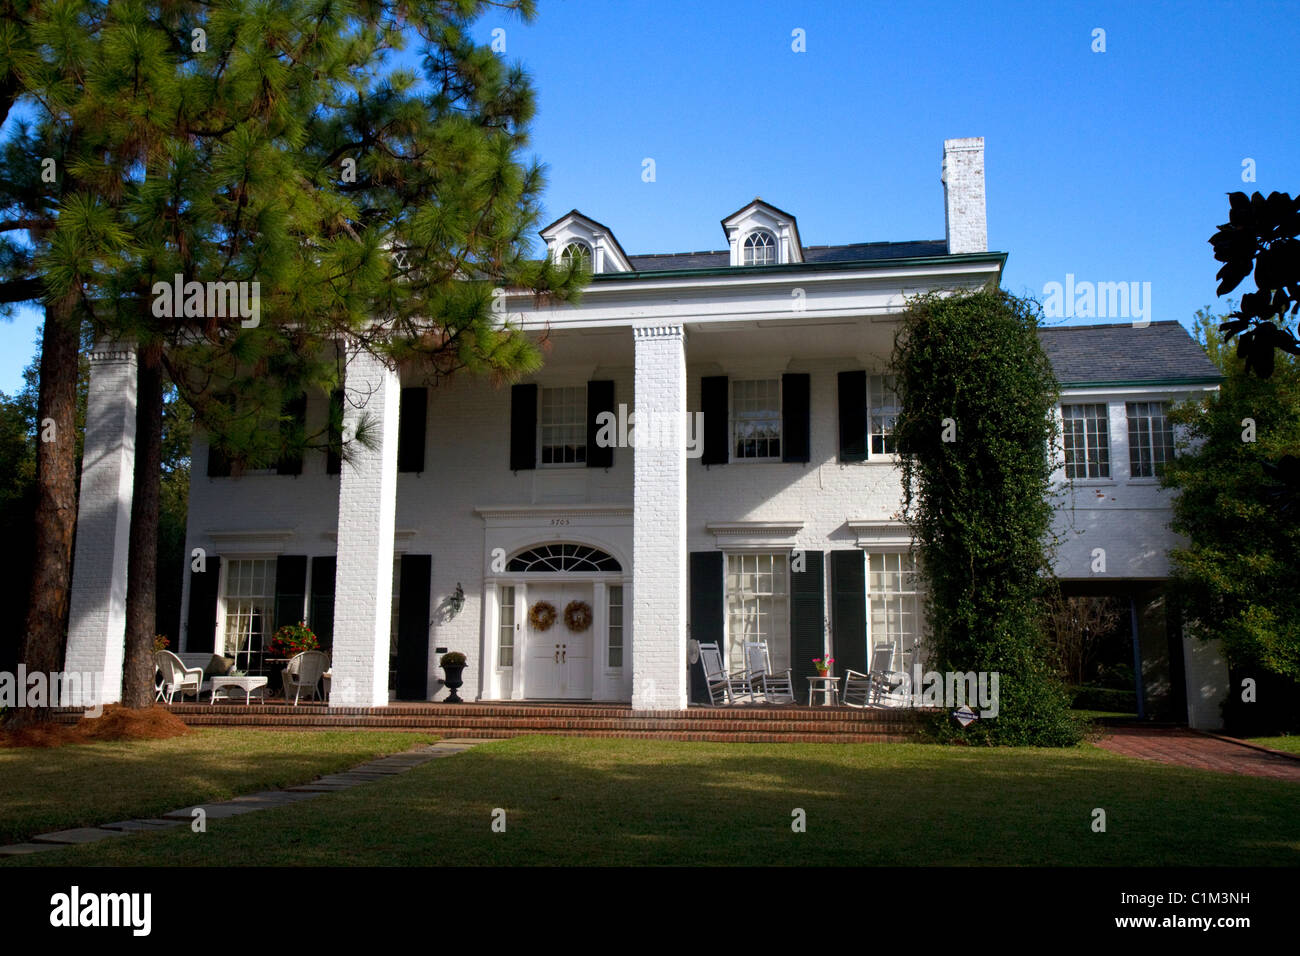 The Fabacher House on Saint Charles Avenue in the Garden District of New Orleans, Louisiana, USA. Stock Photo